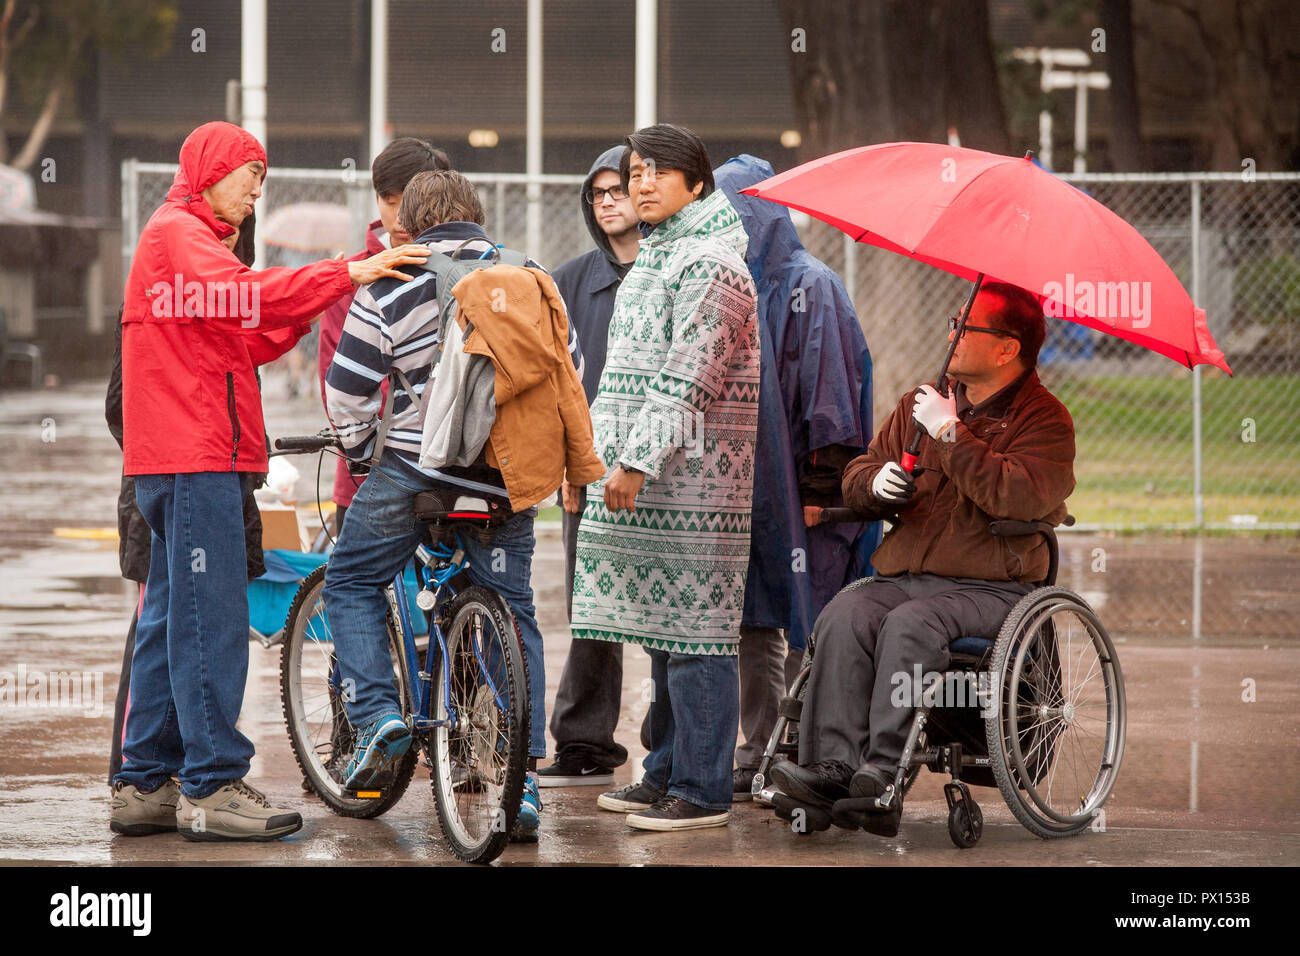 On a rainy afternoon, two evangelical Asian preachers reach out to homeless men at an encampment in Santa Ana, CA.    (Photo by Spencer Grant) Stock Photo